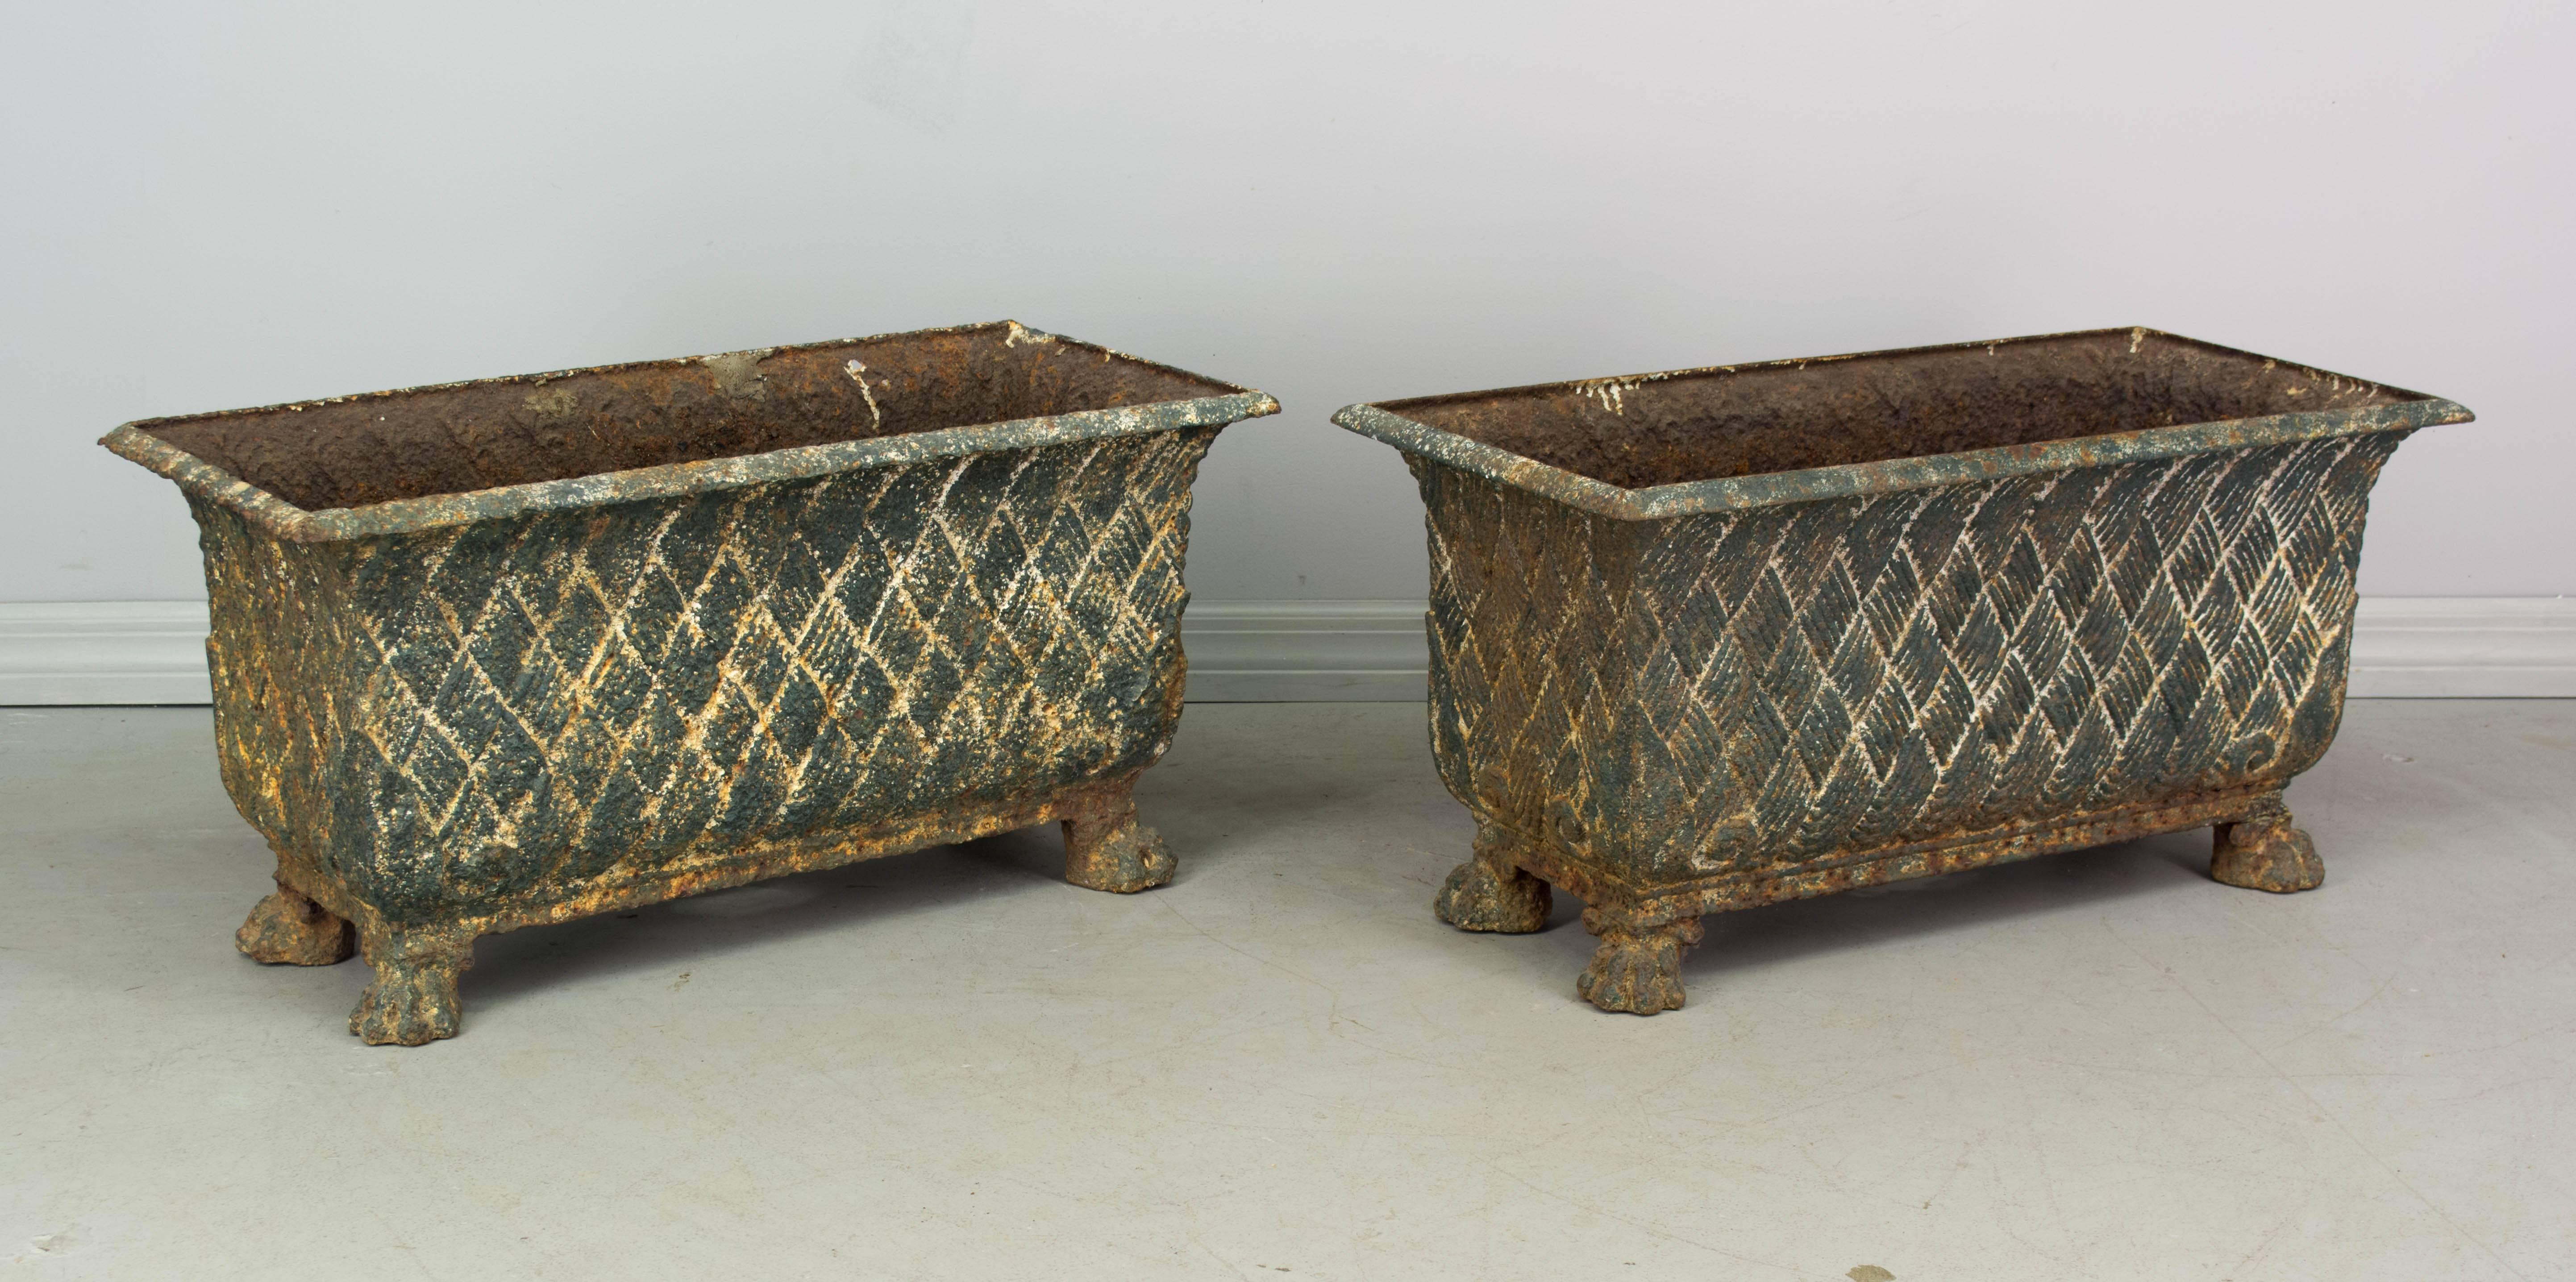 Pair of 19th century French cast iron planters with old green painted patina. Oblong shape with a basketweave pattern and lion paw feet. We have a large selection of French antiques. Please visit our web site.